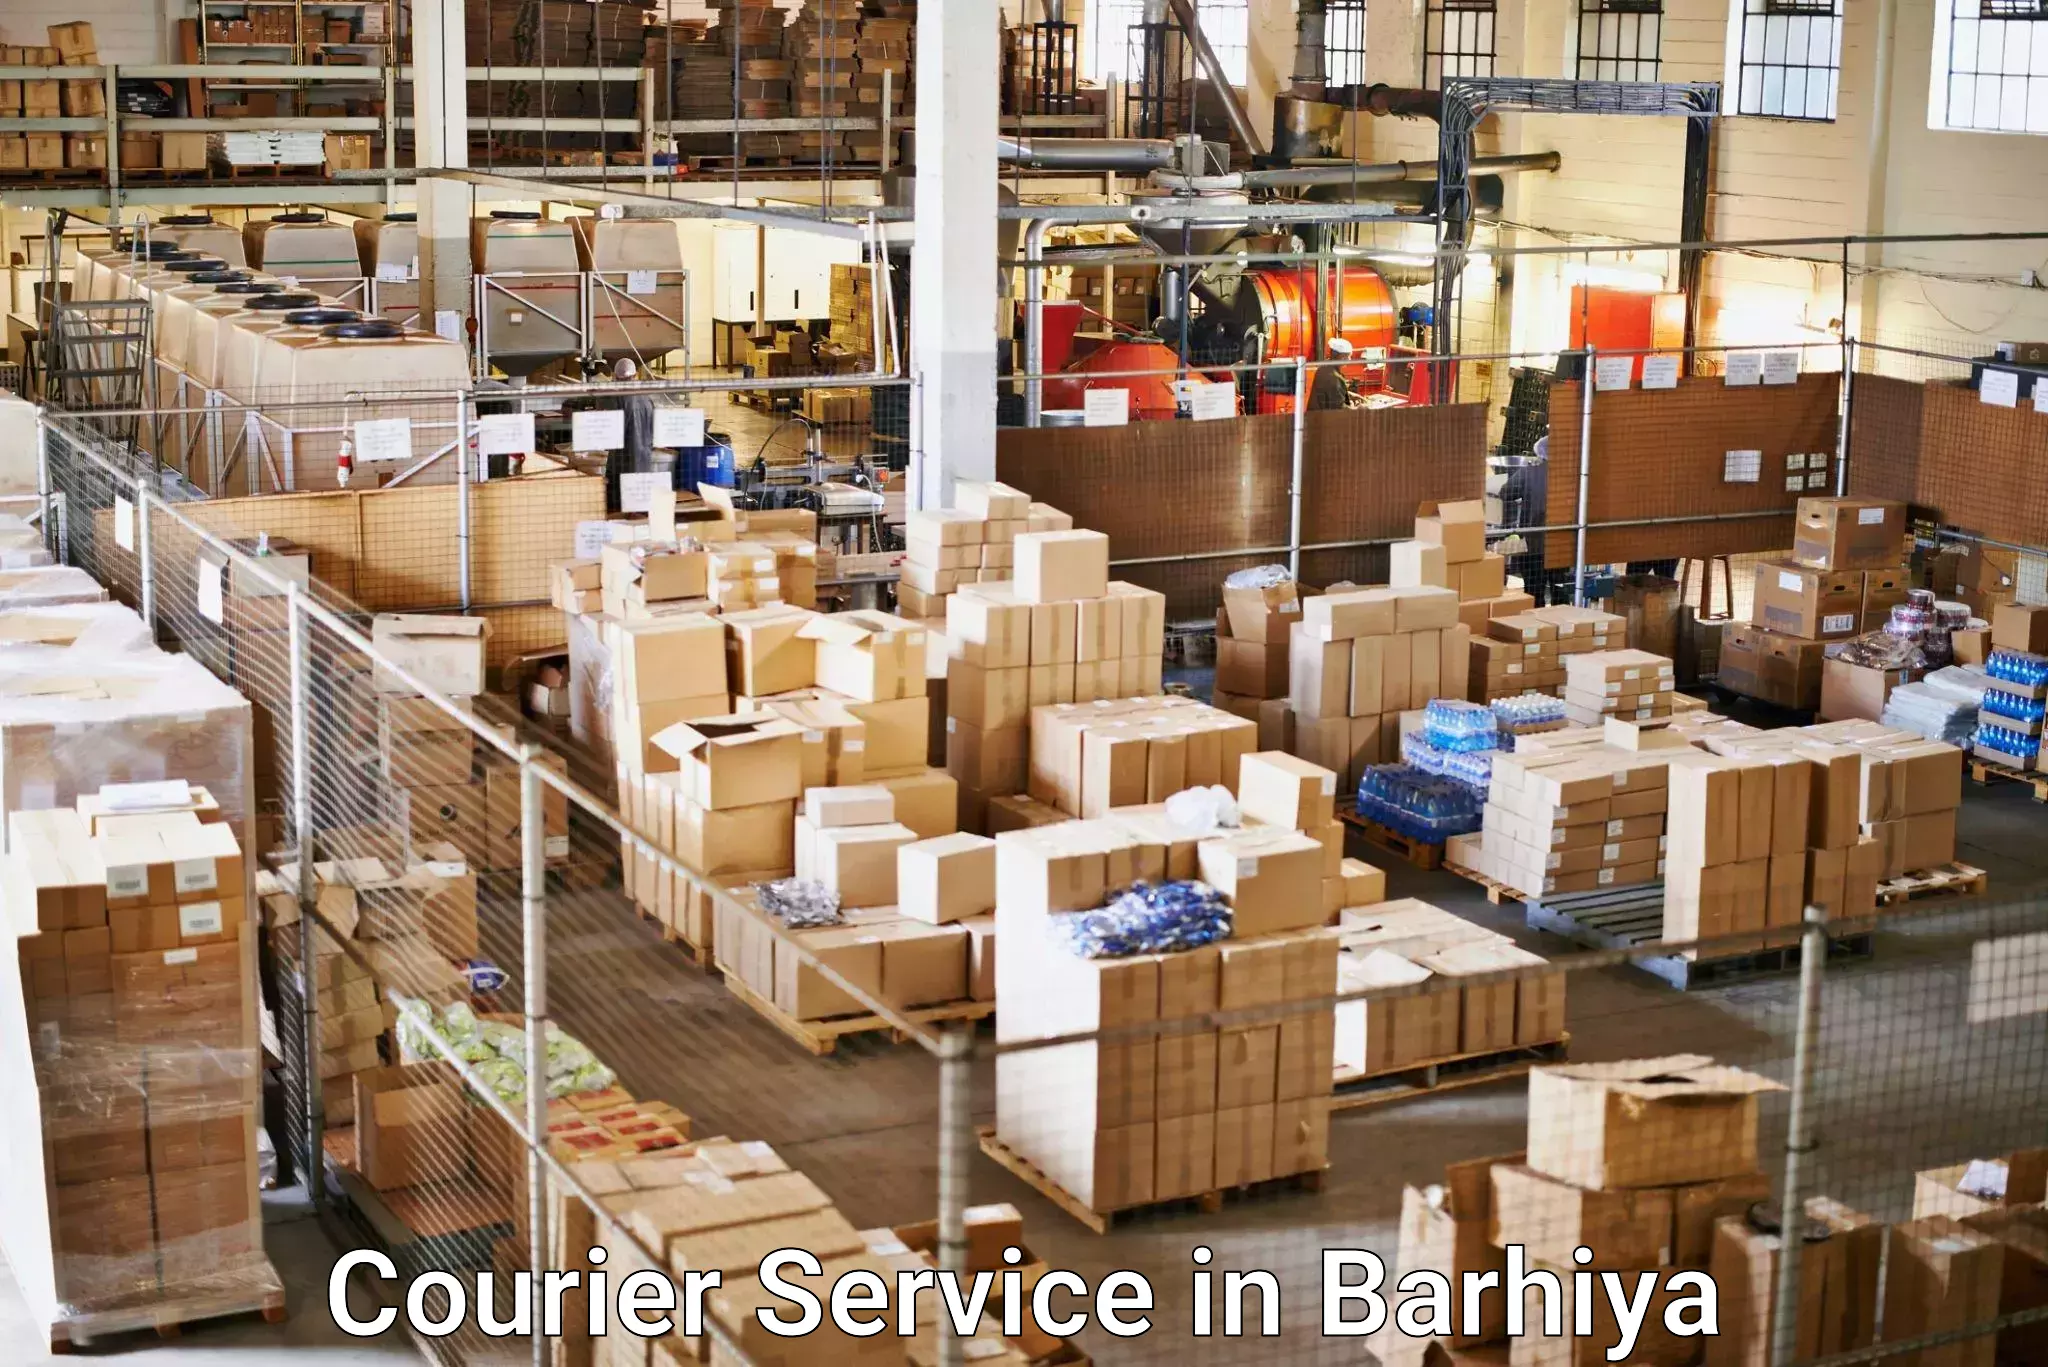 Streamlined delivery processes in Barhiya